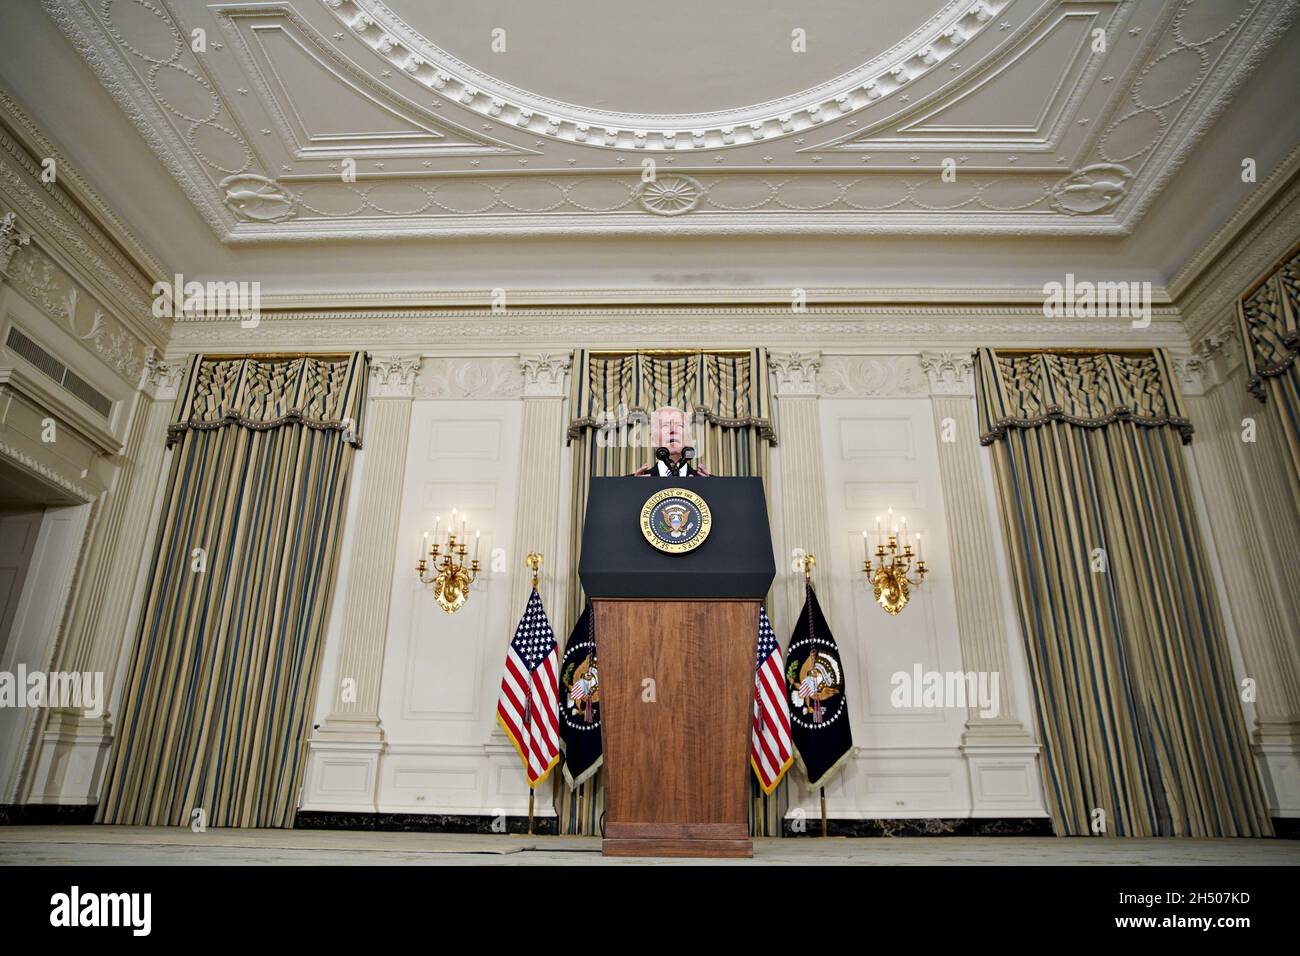 Washington, United States. 05th Nov, 2021. U.S. President Joe Biden arrives to speak on the October jobs report in the State Dining of the White House in Washington, DC, U.S., on Friday, Nov. 5, 2021. The U.S. labor market got back on track adding 510,000 jobs, which exceeded economists' expectations. Photo by Al Drago/UPI Credit: UPI/Alamy Live News Stock Photo